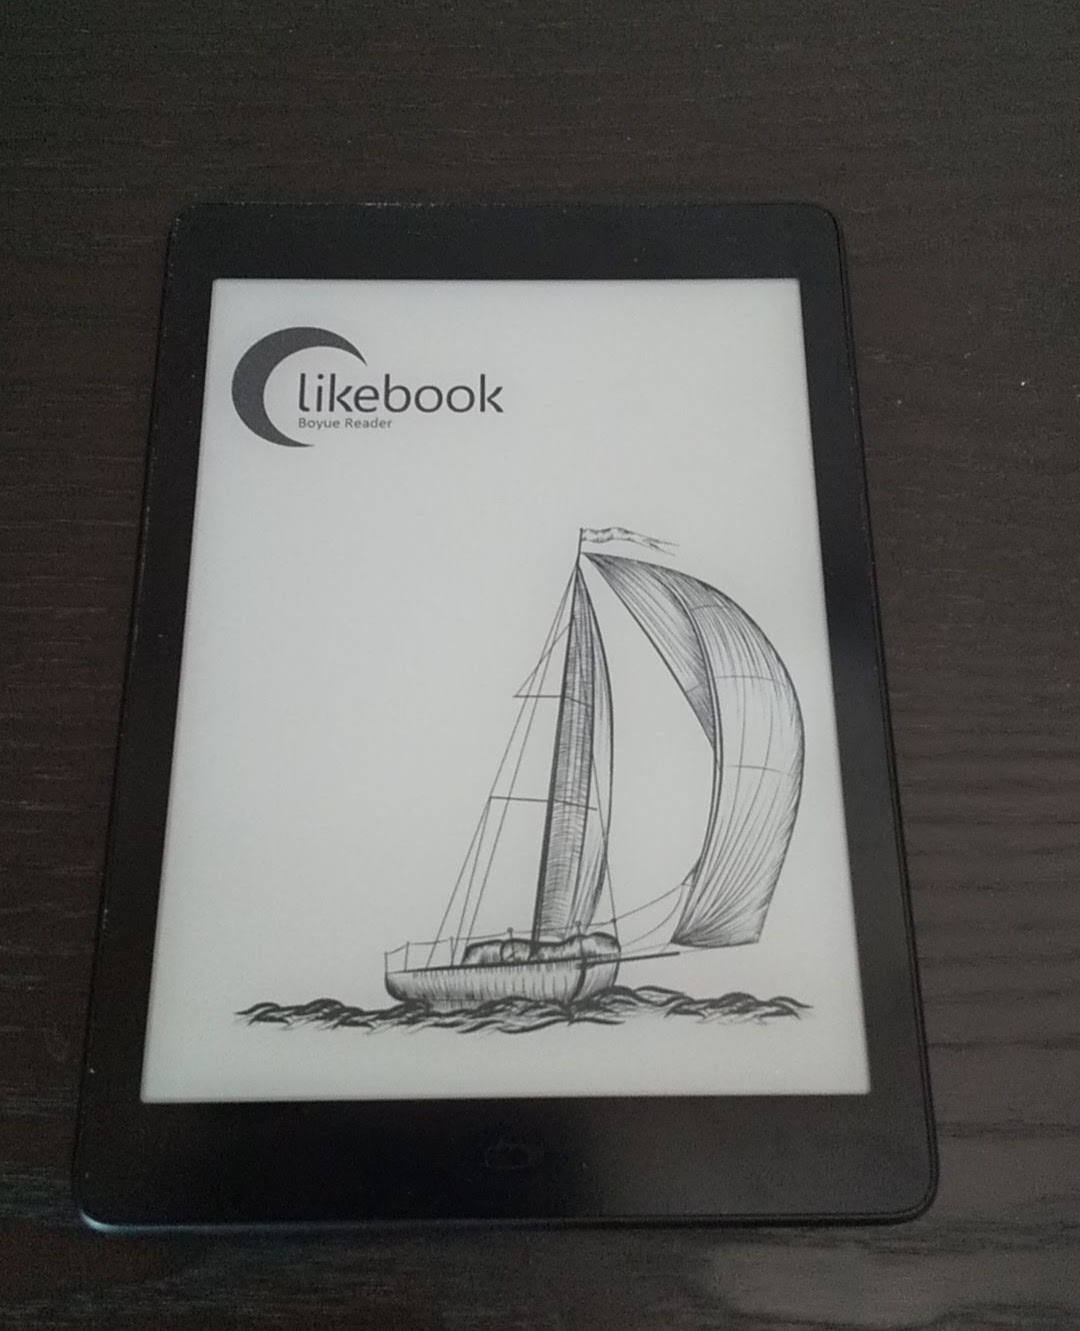 Likebook Ares note（7.8インチEinkタブレット）を買ったのでレビュー ...